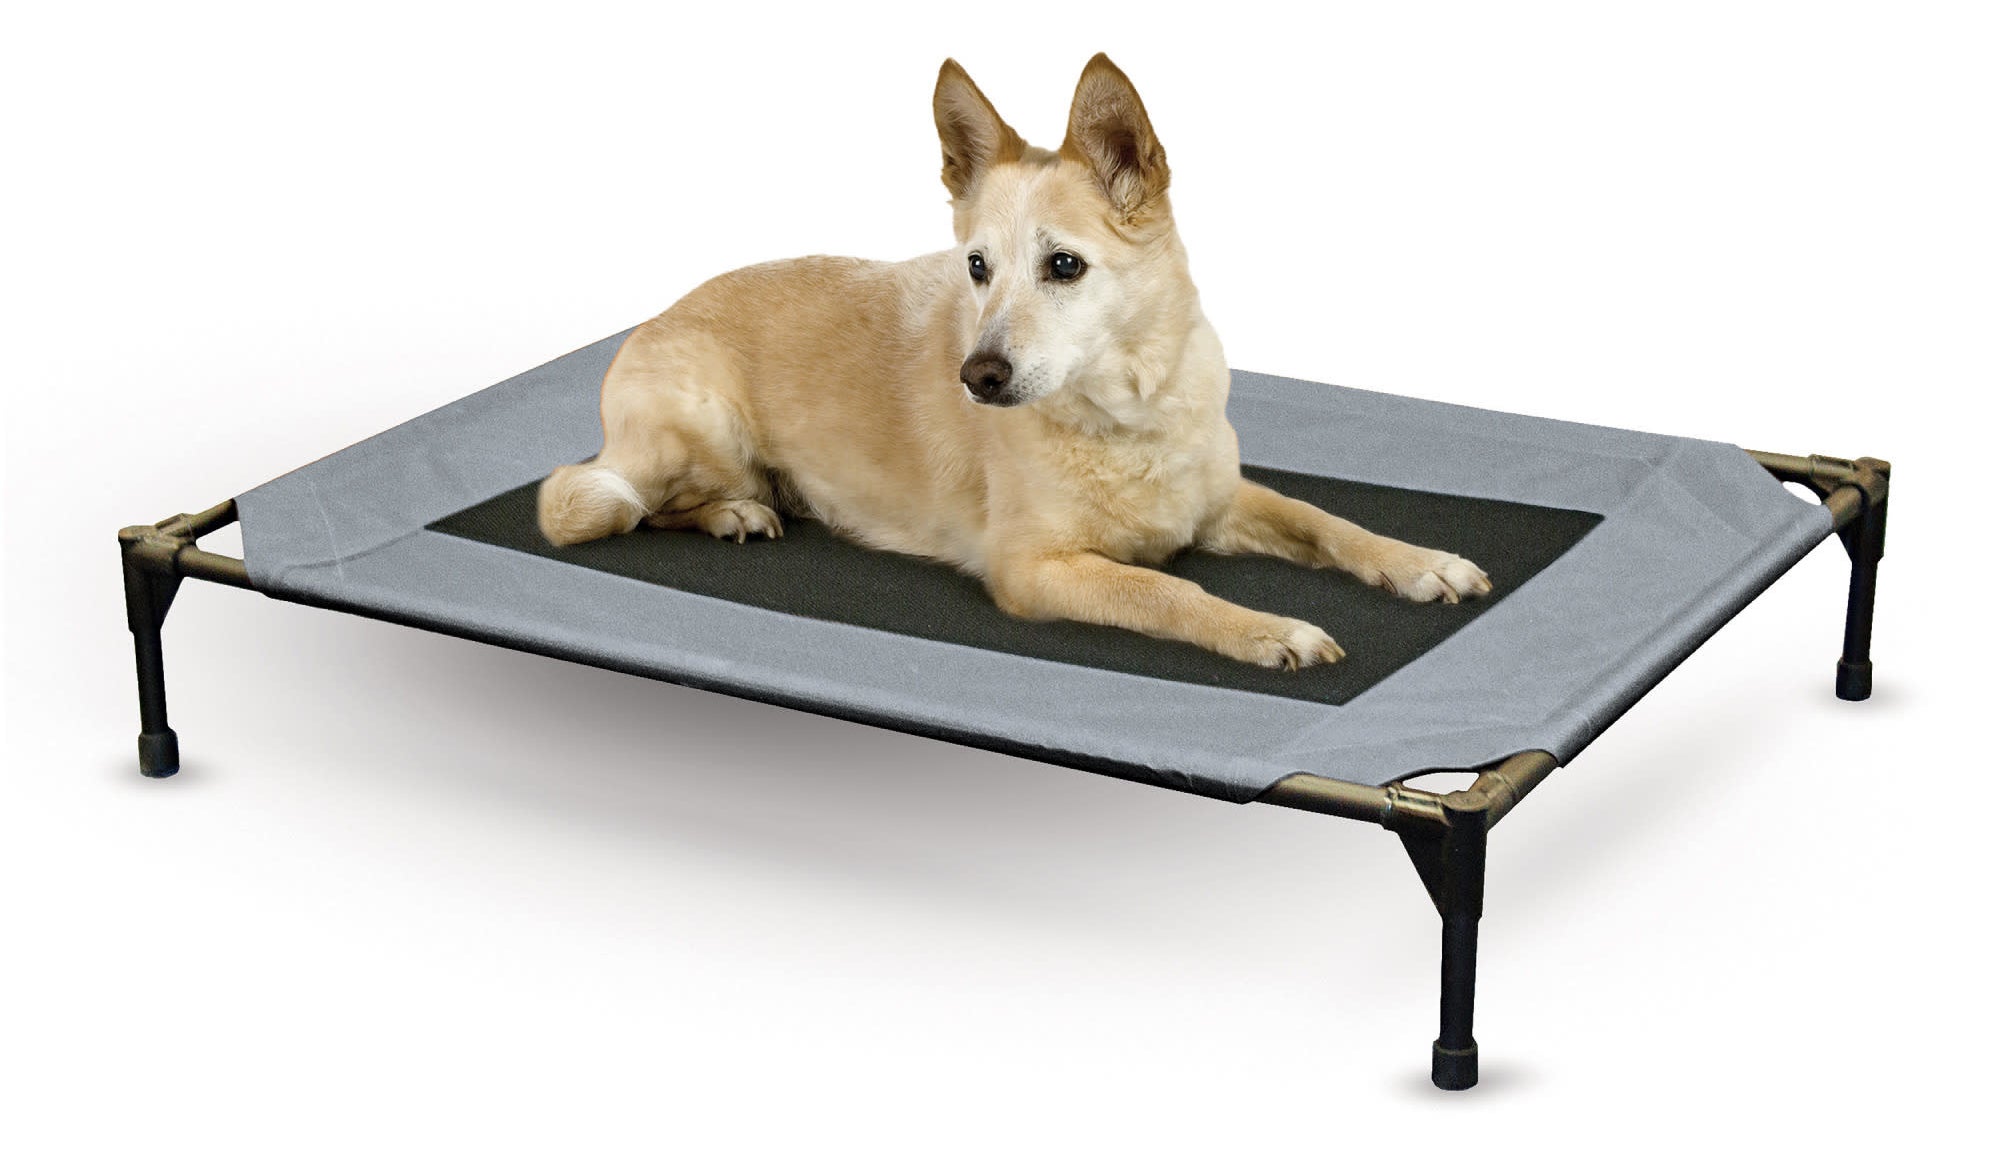 a medium-sized dog on top of the blue and black cot